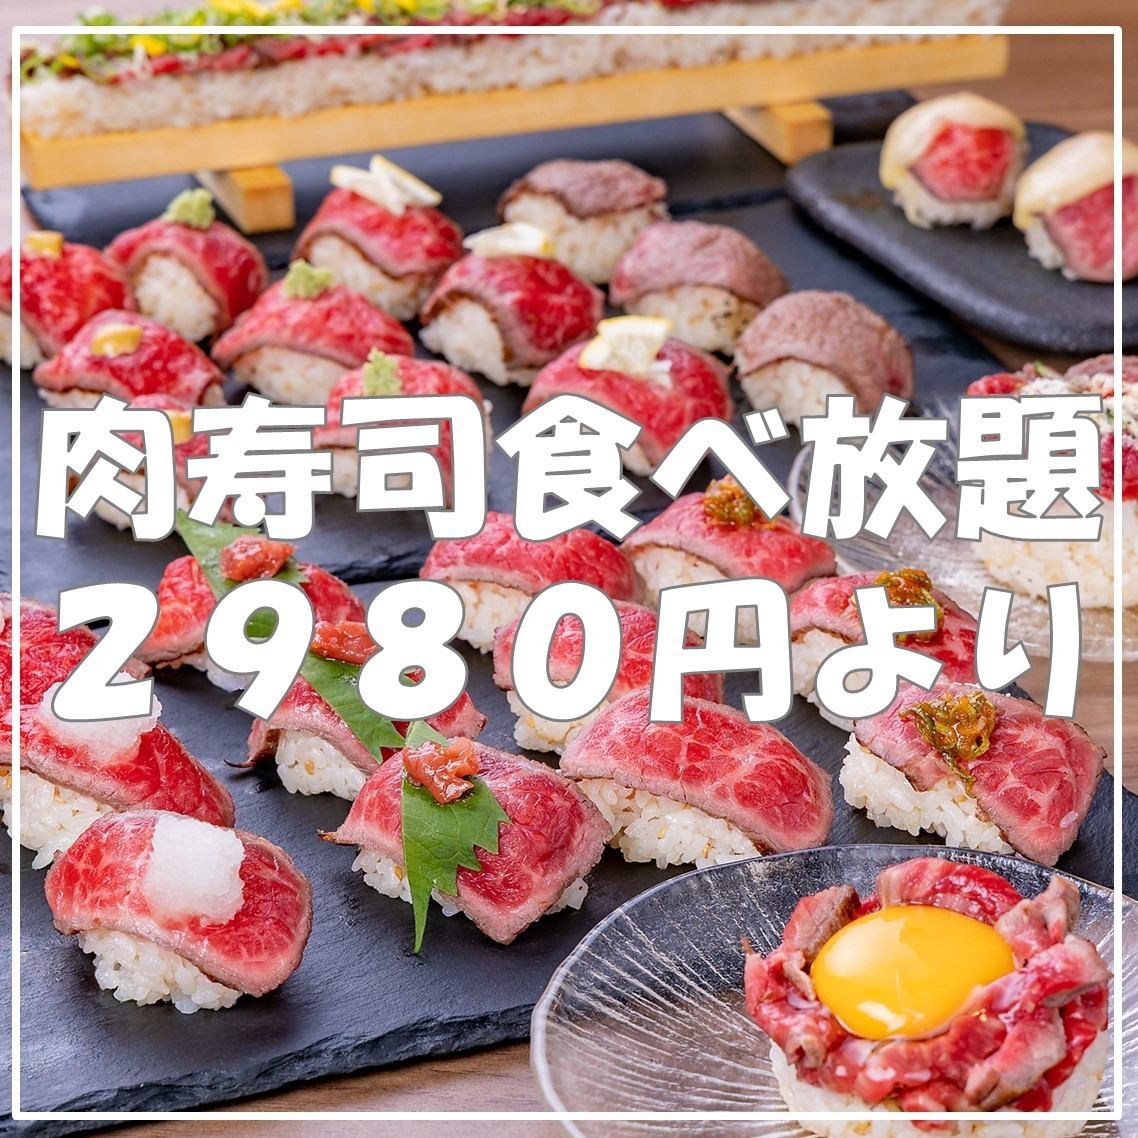 All-you-can-eat meat sushi from 2,980 yen ♪ Lots of great coupons, including visits until 6pm